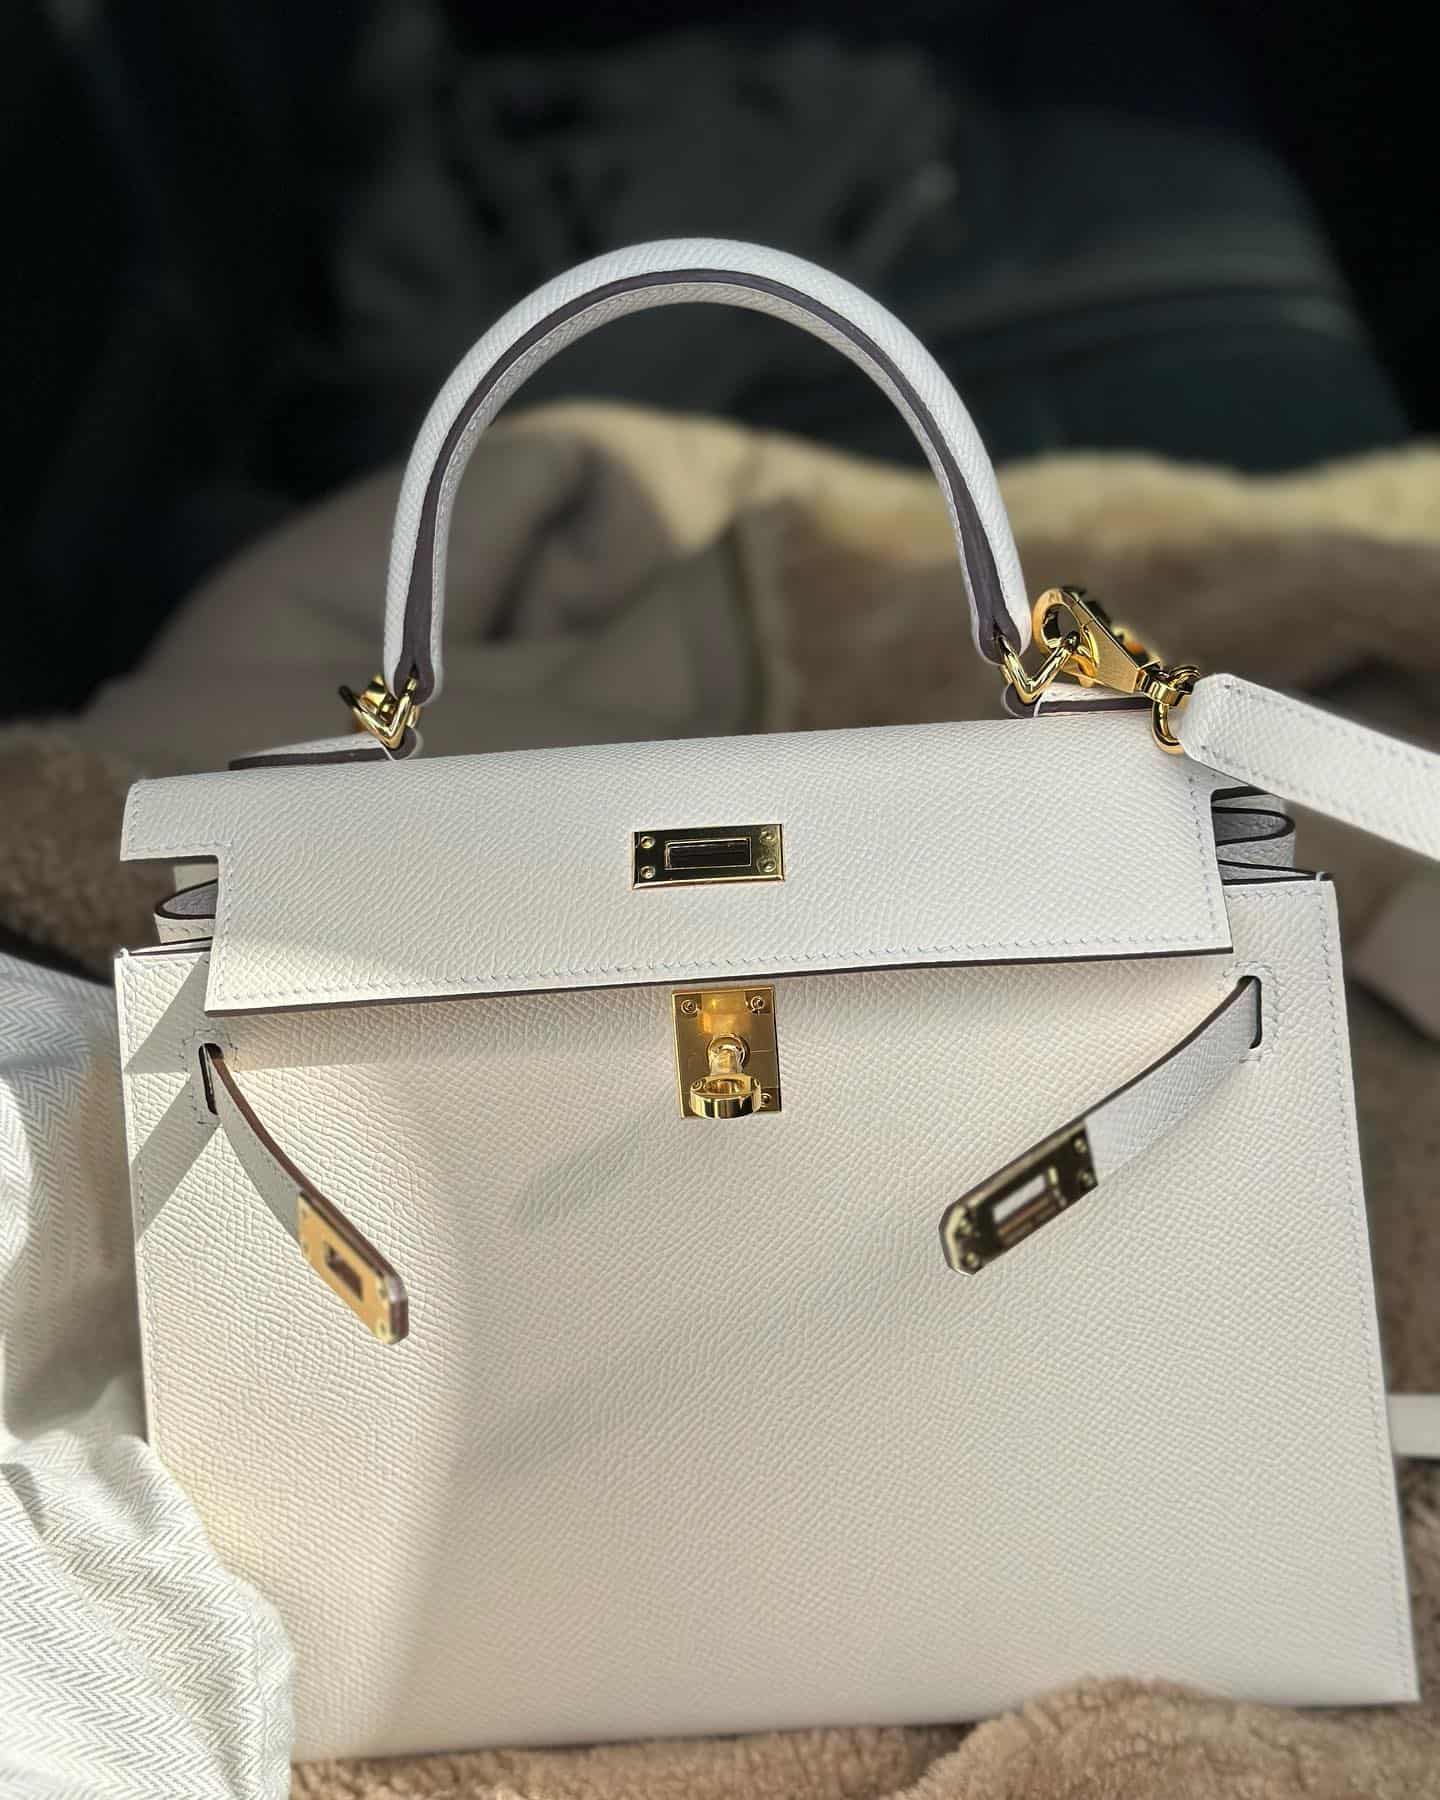 Why are Hermes bags expensive